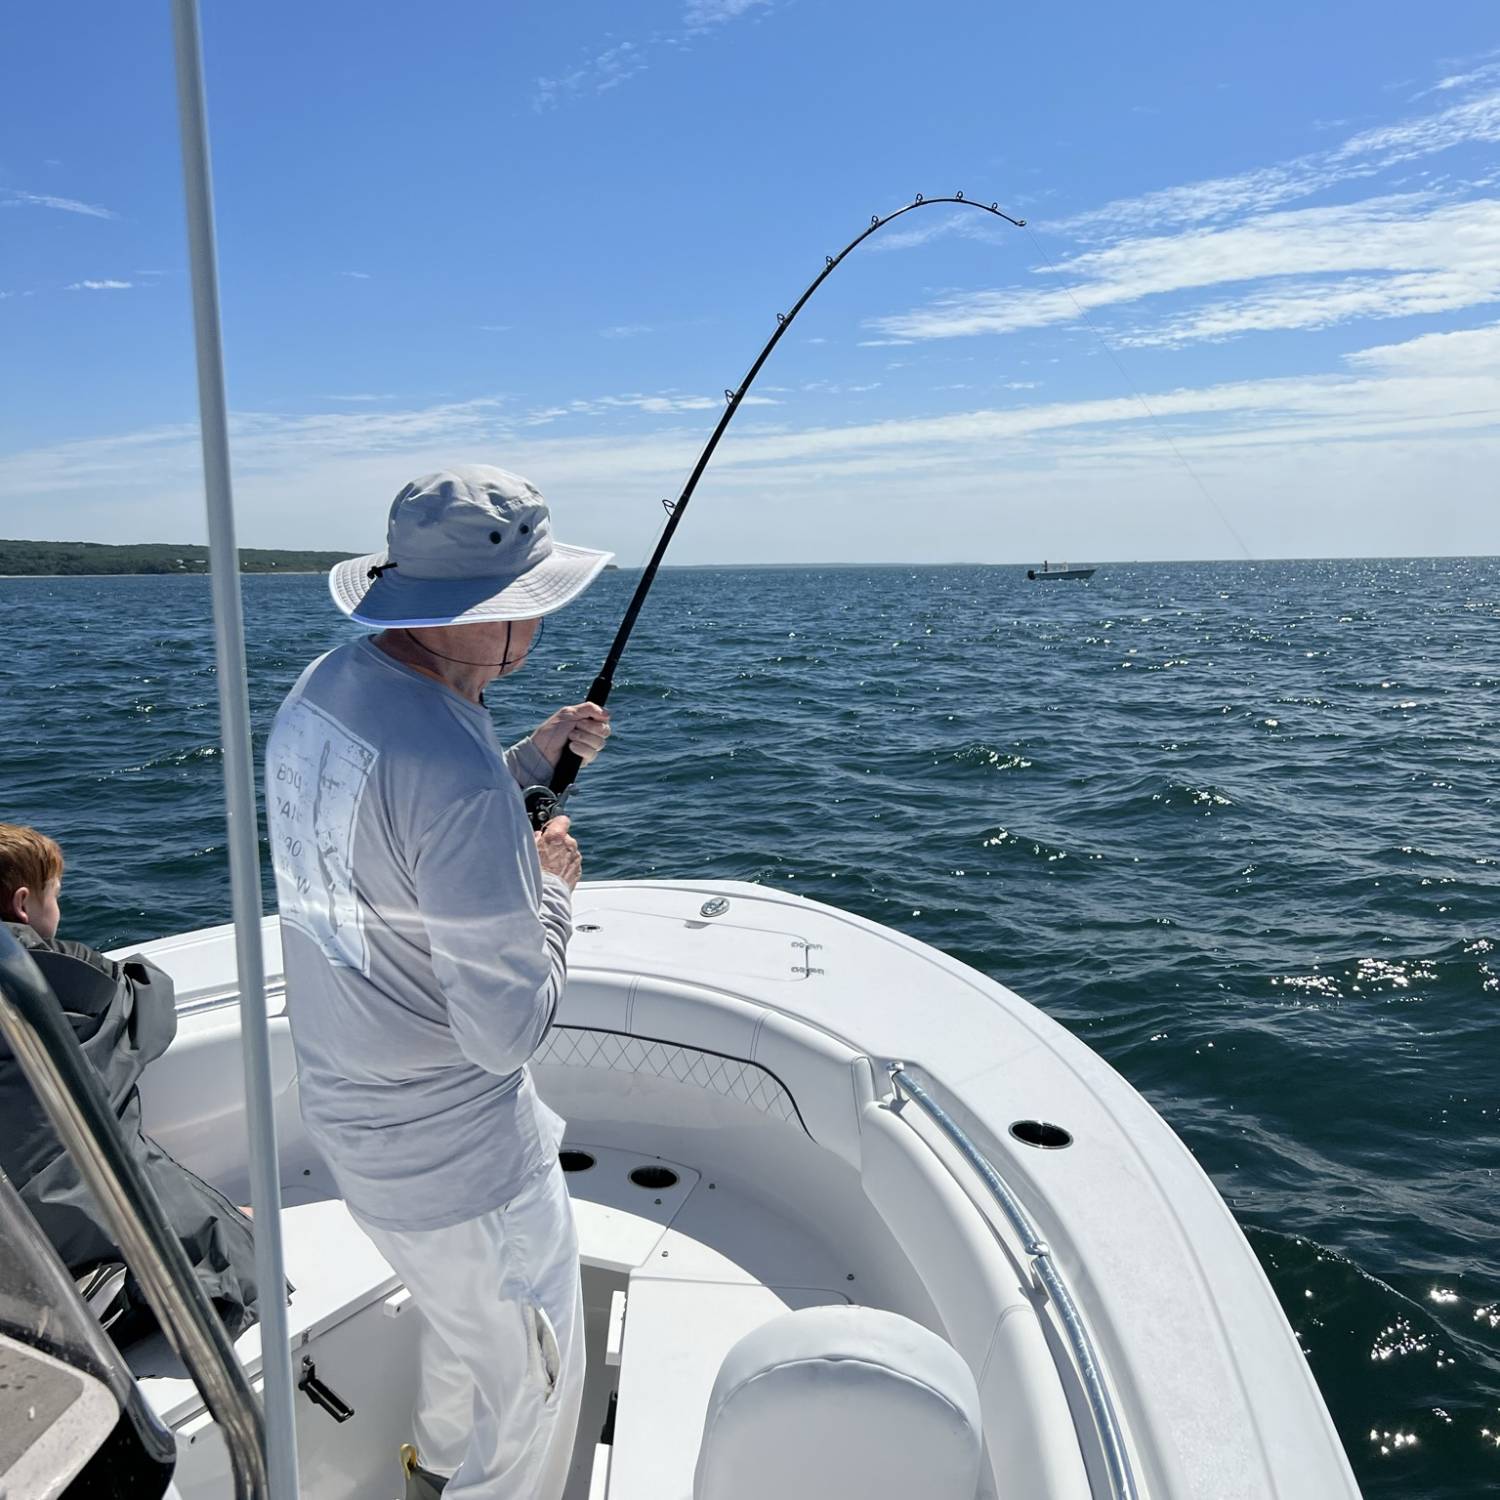 Photo Contest Entry, Fathers Day Bent Rod, Entry #PC2281